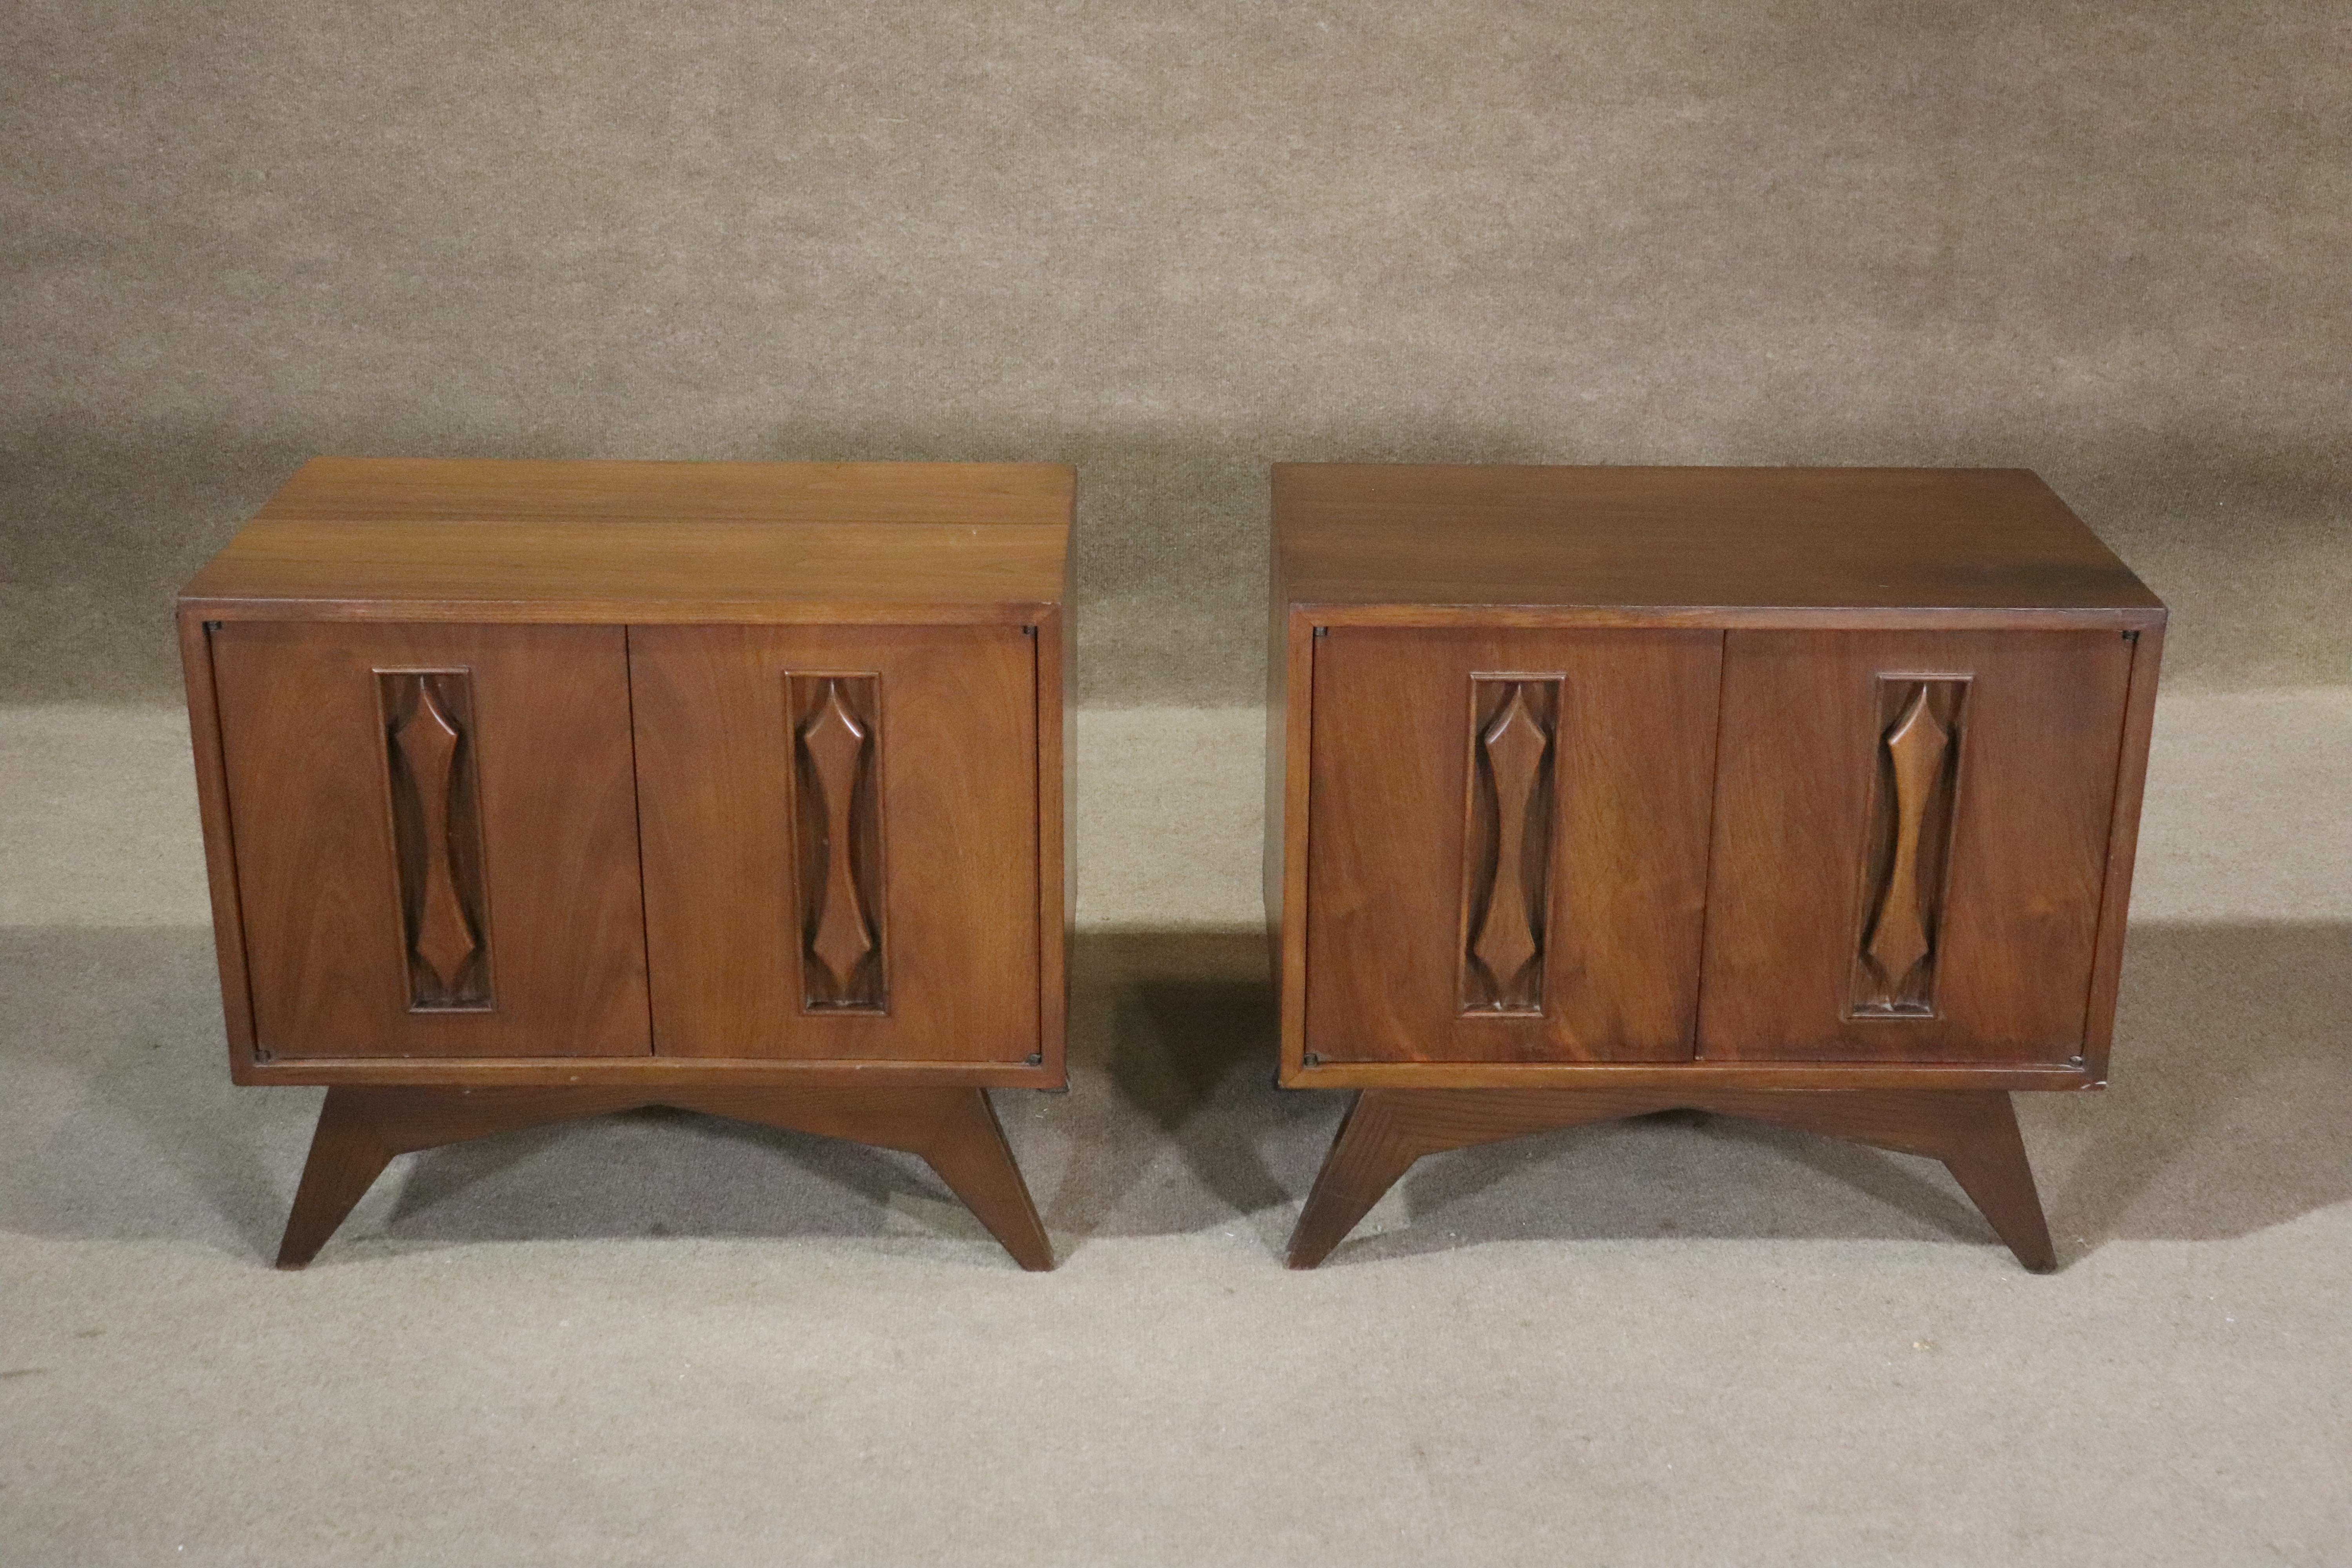 Vintage American made nightstands with sculpted doors and angled legs. Open cabinet storage space, great for living or bedroom use.
Please confirm location NY or NJ